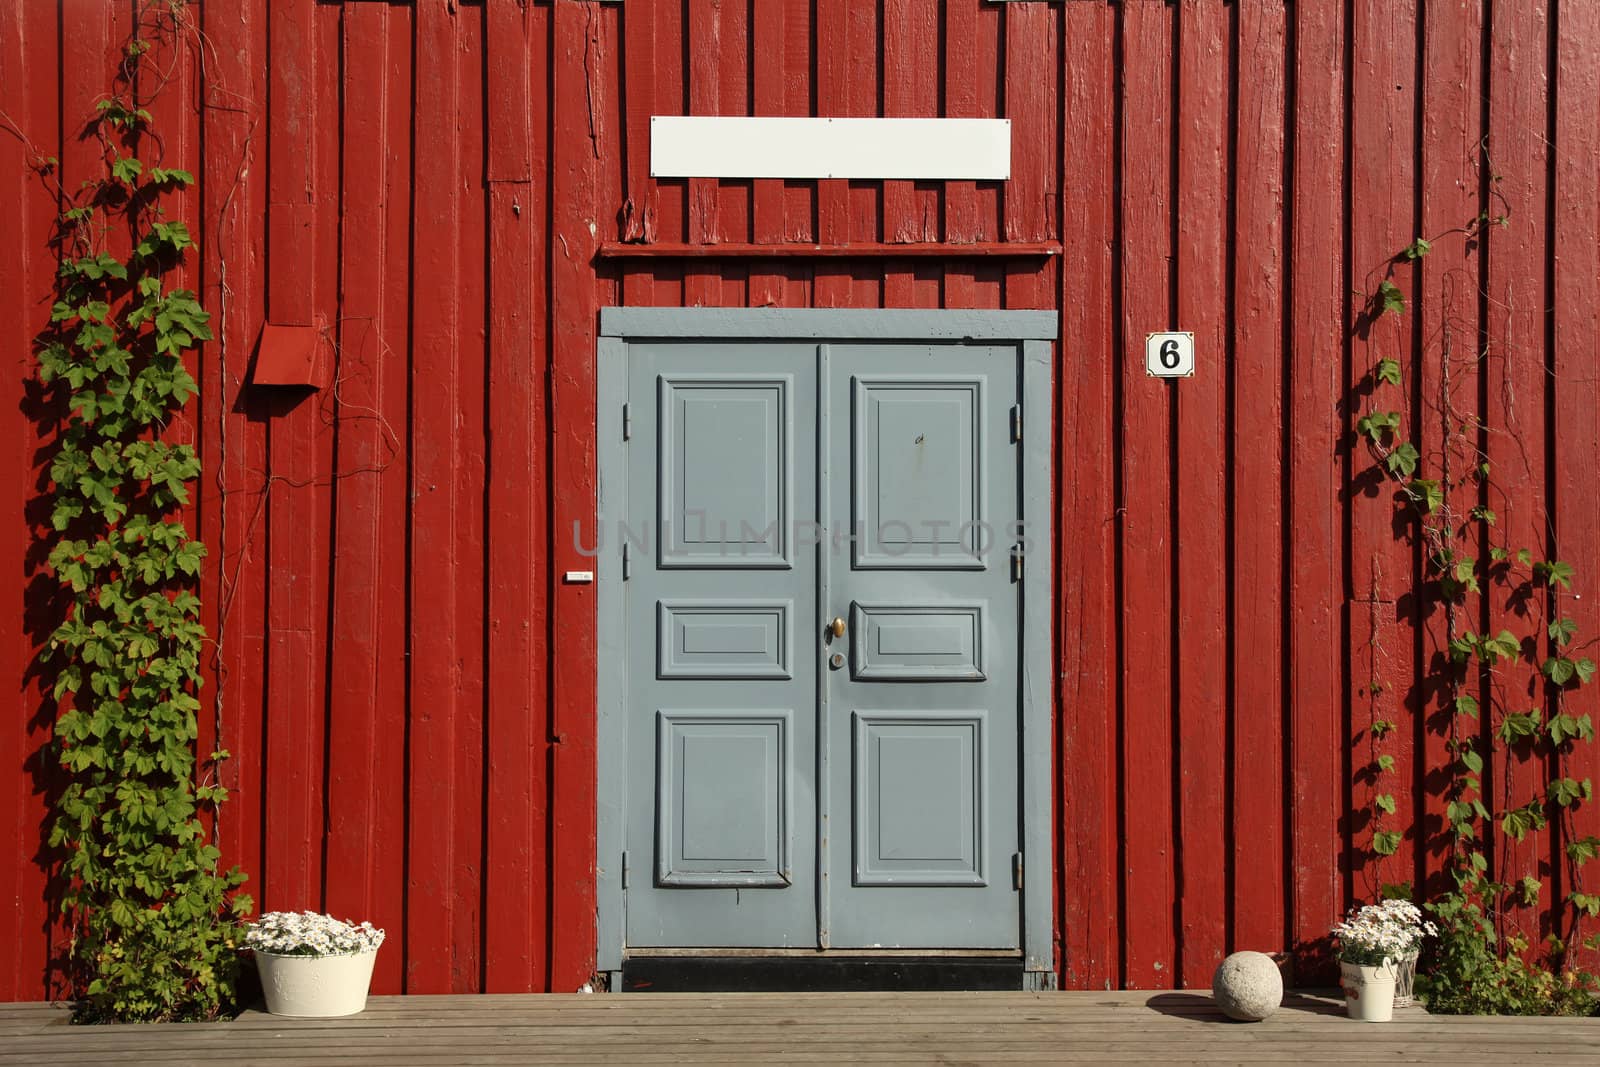 Gred door with red wooden wall by biitli